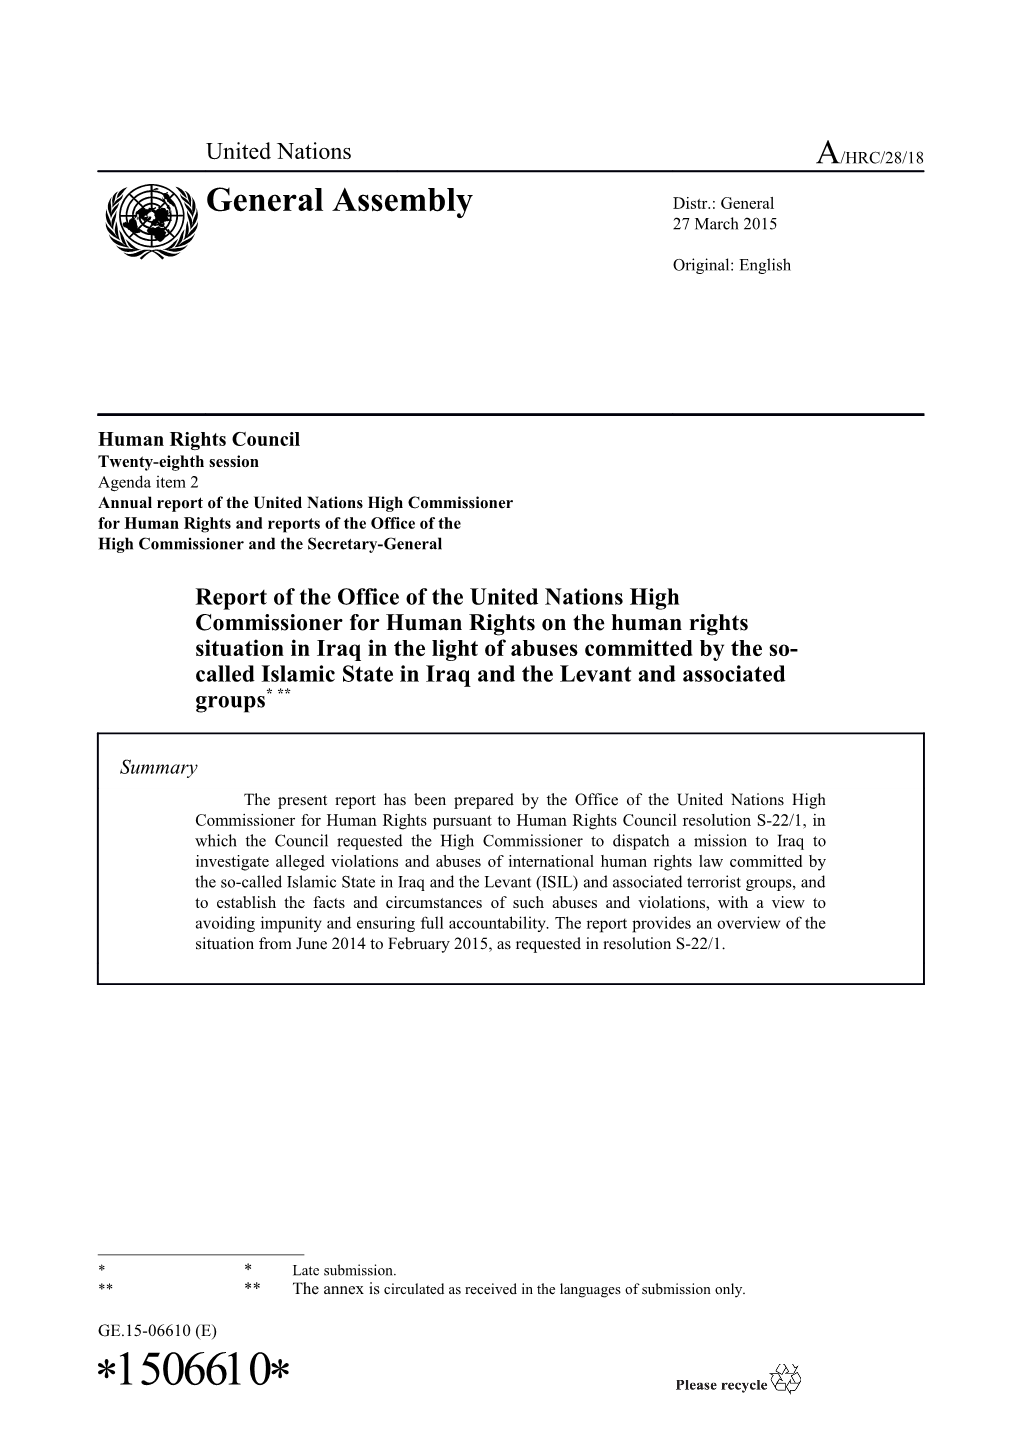 Report of the Office of the United Nations High Commissioner for Human Rights on the Human